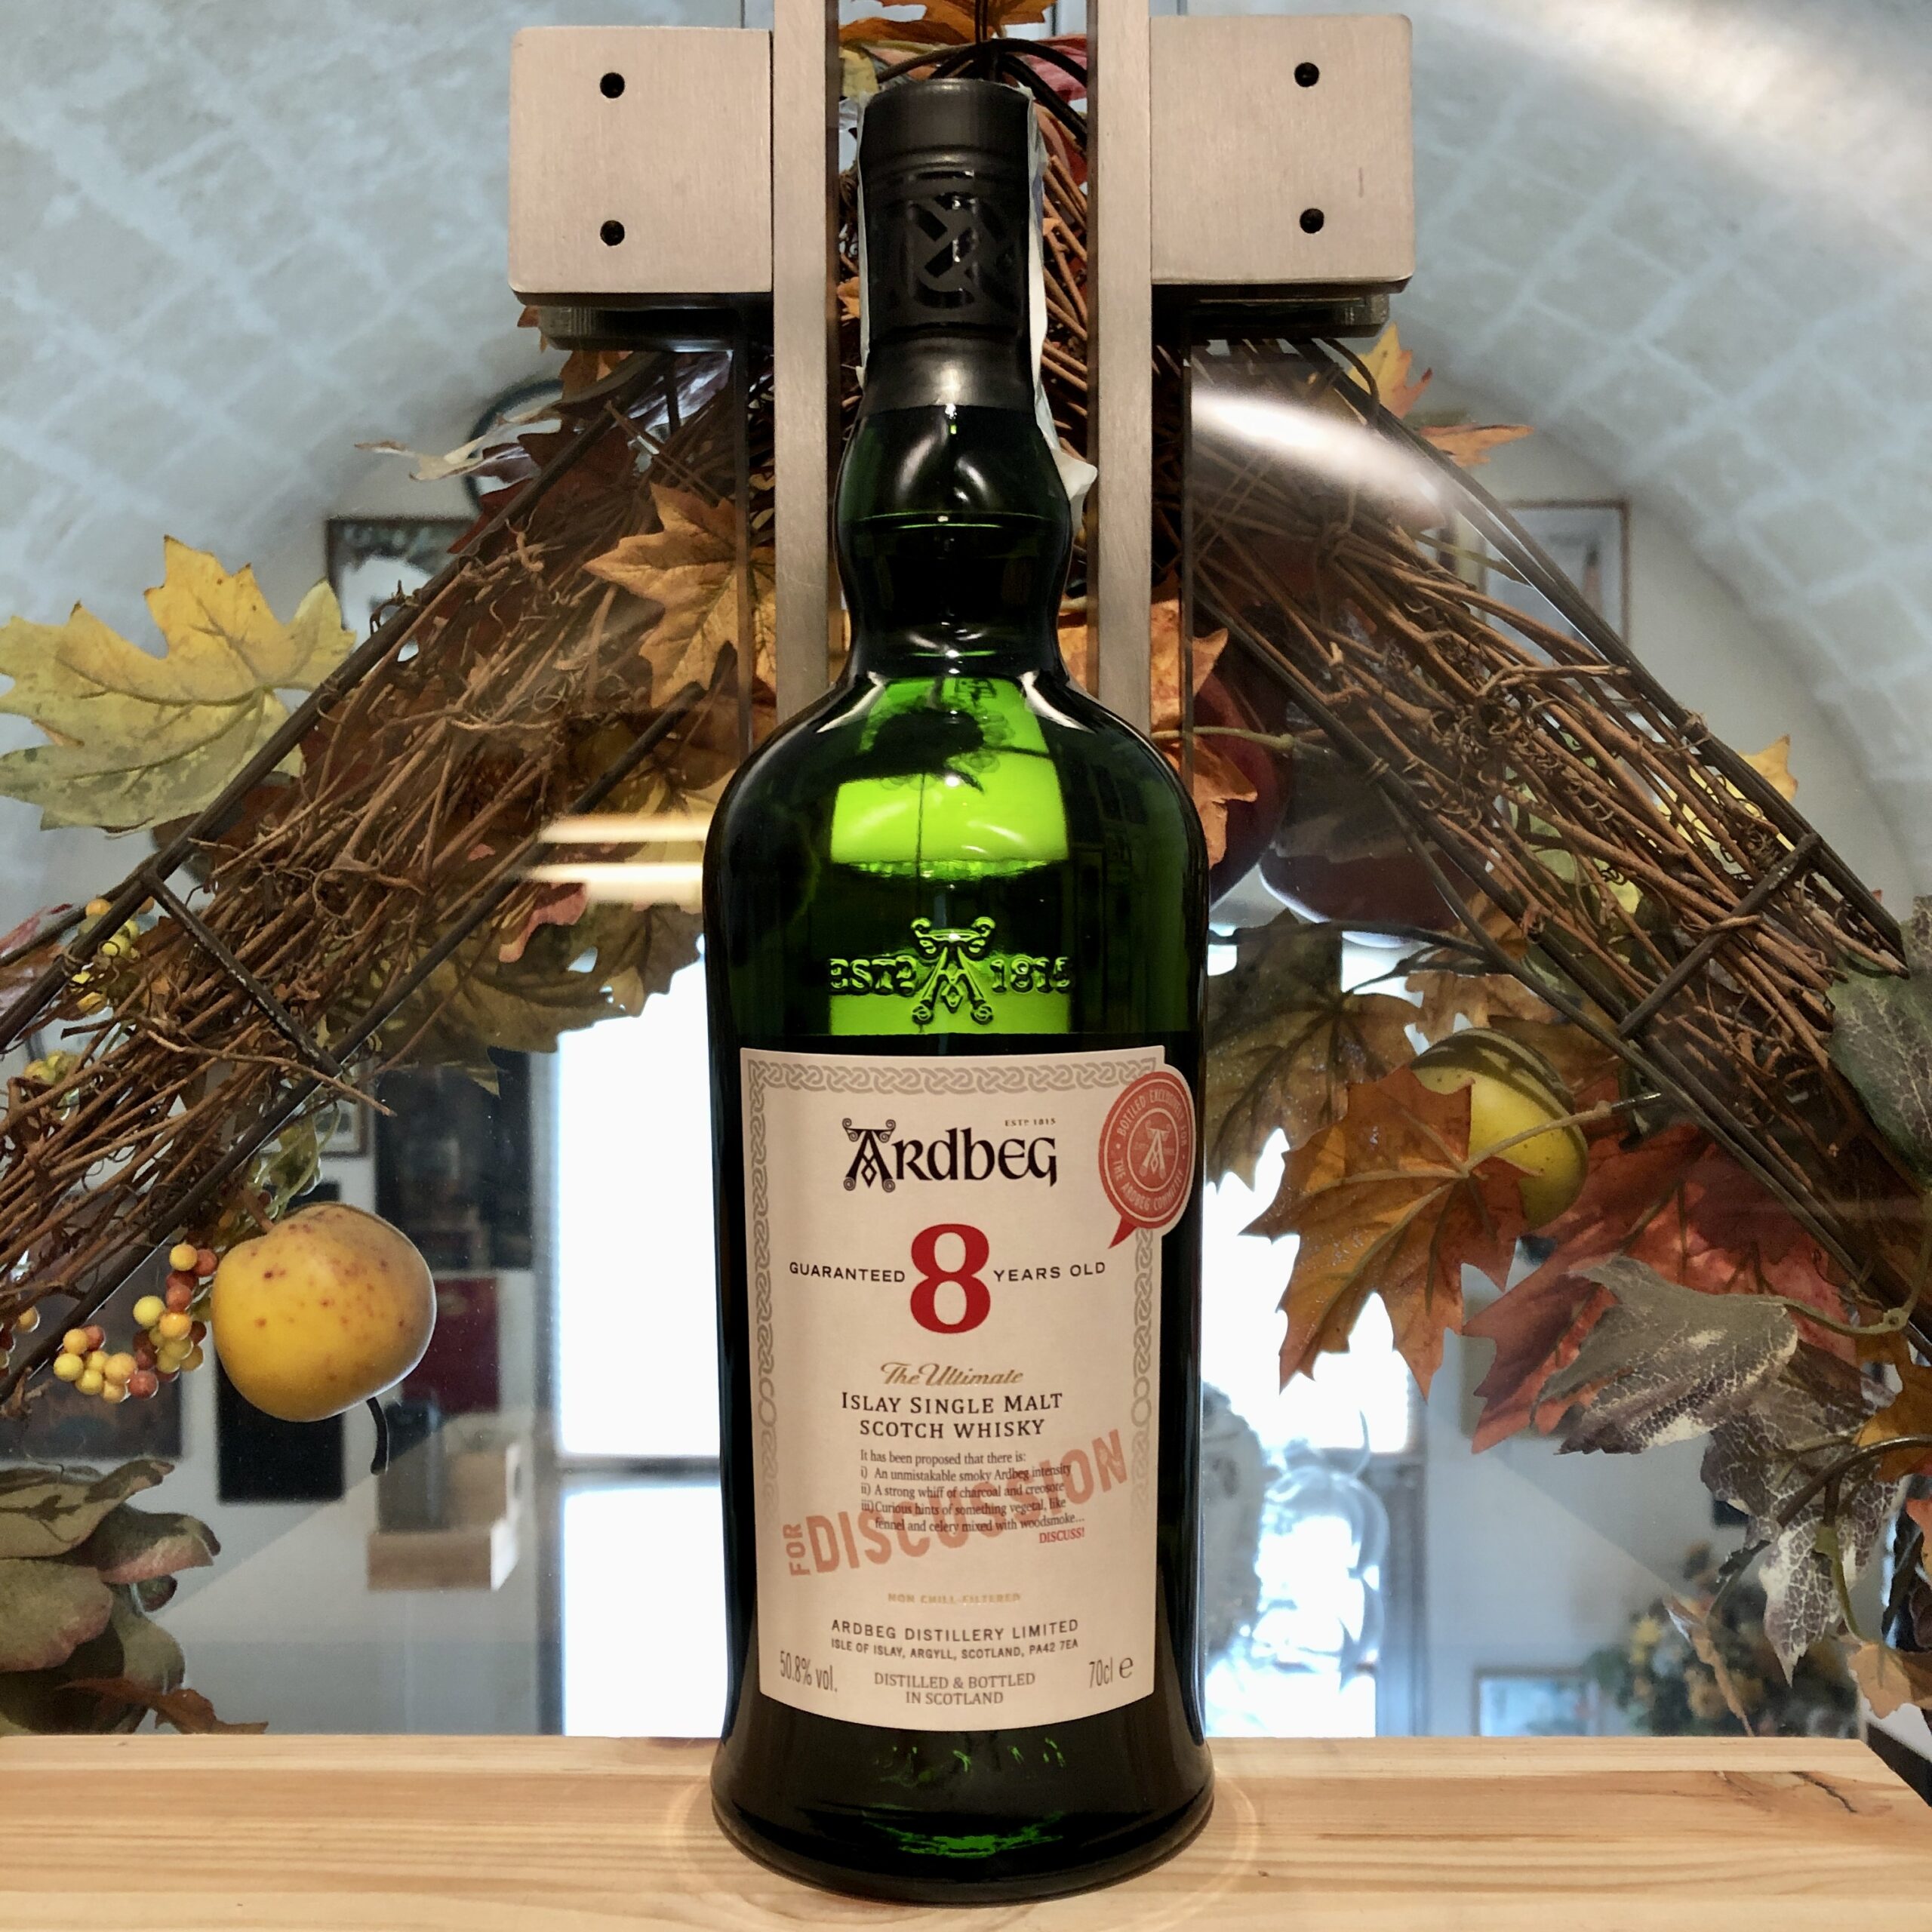 Ardbeg 8 Years Old Islay Single Malt Scotch Whisky for Discussion 2022